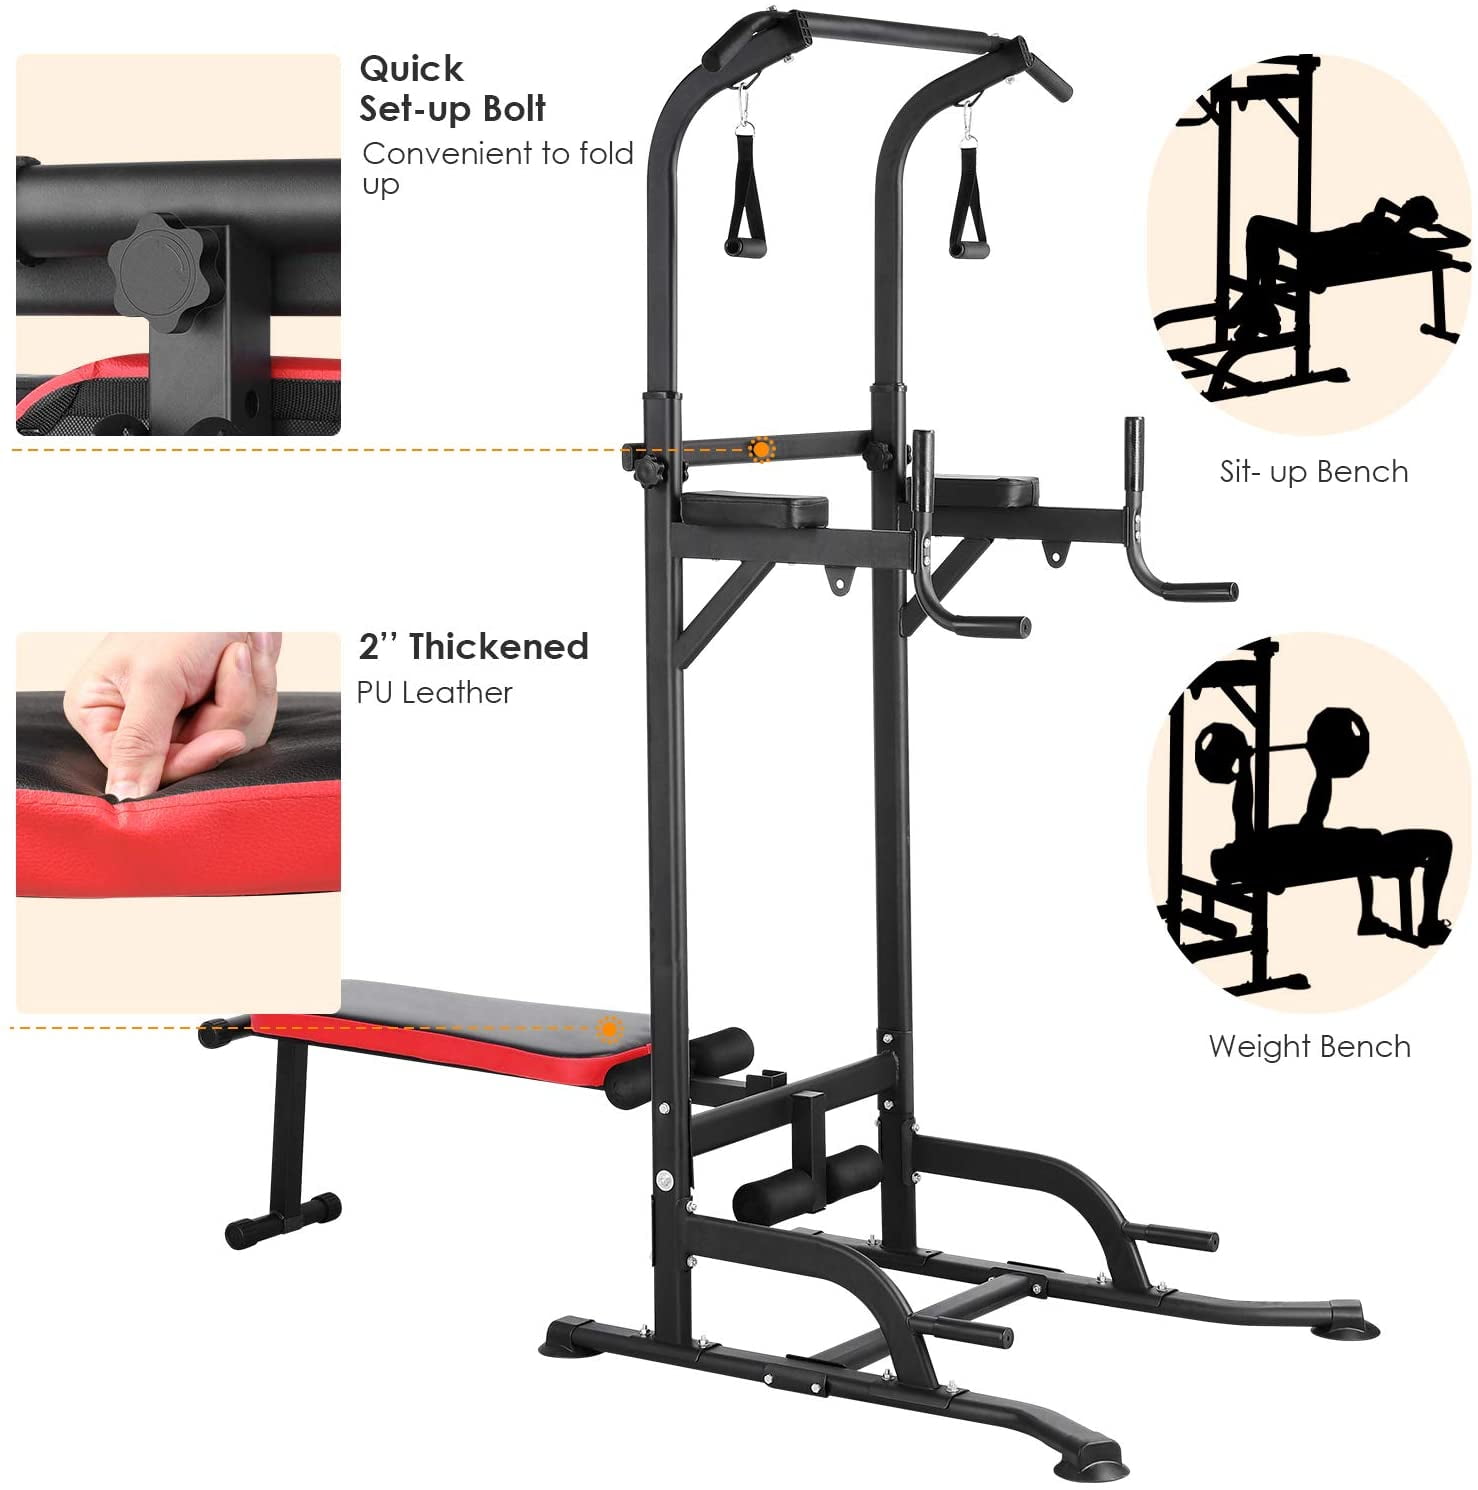 HEAVY DUTY PULL UP BAR DIP STATION Wall Mounted Exercise Equipment Home Gym 